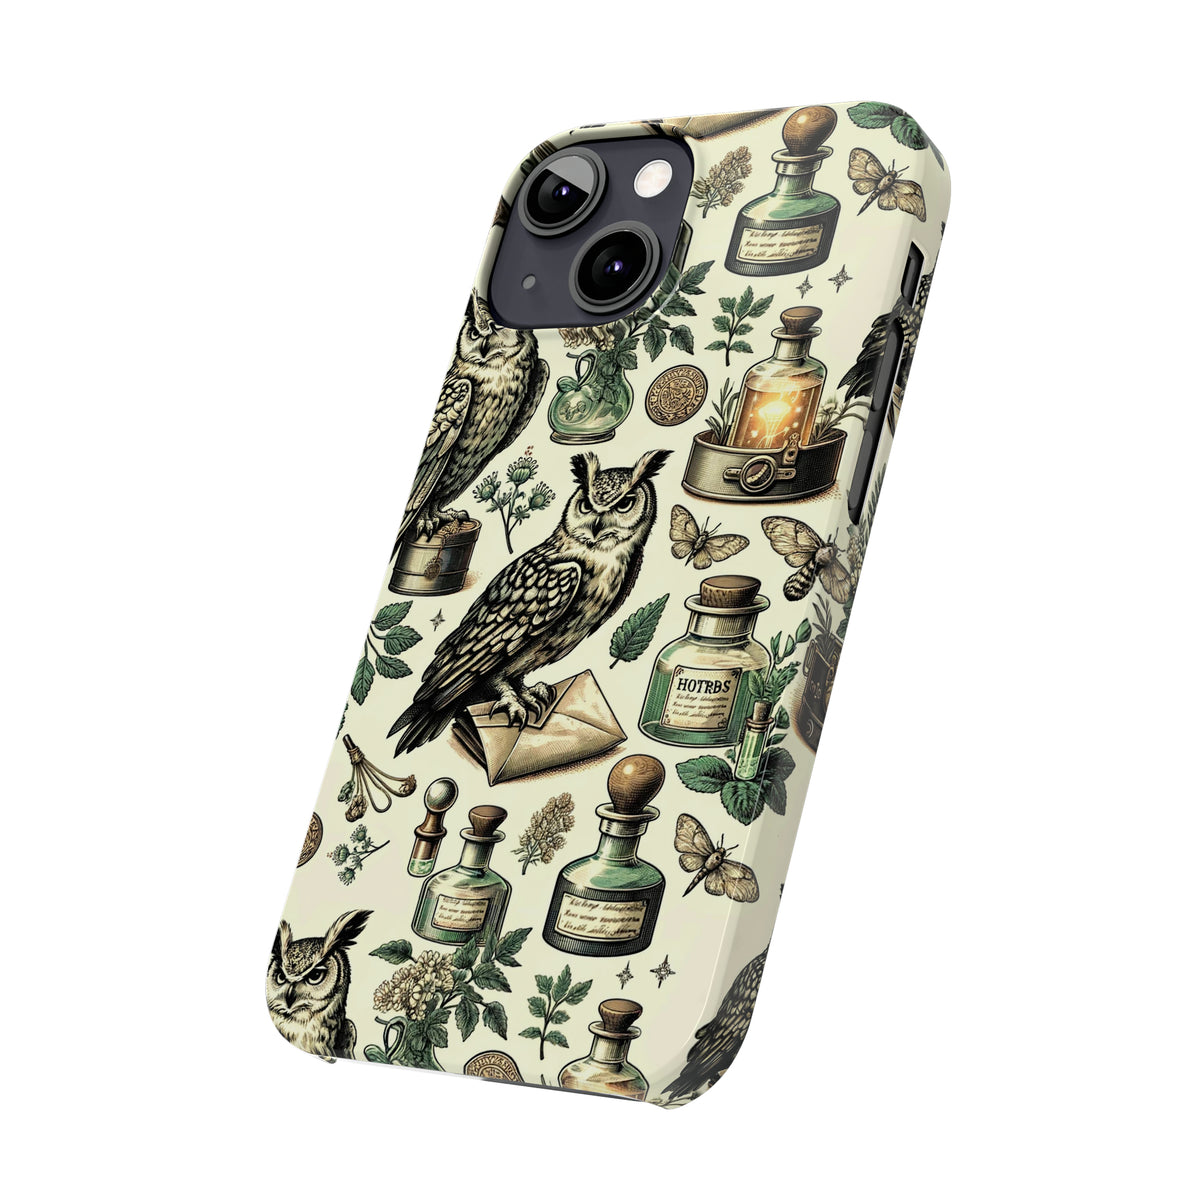 Vintage Owls and Potions in World of Wizards Phone Case